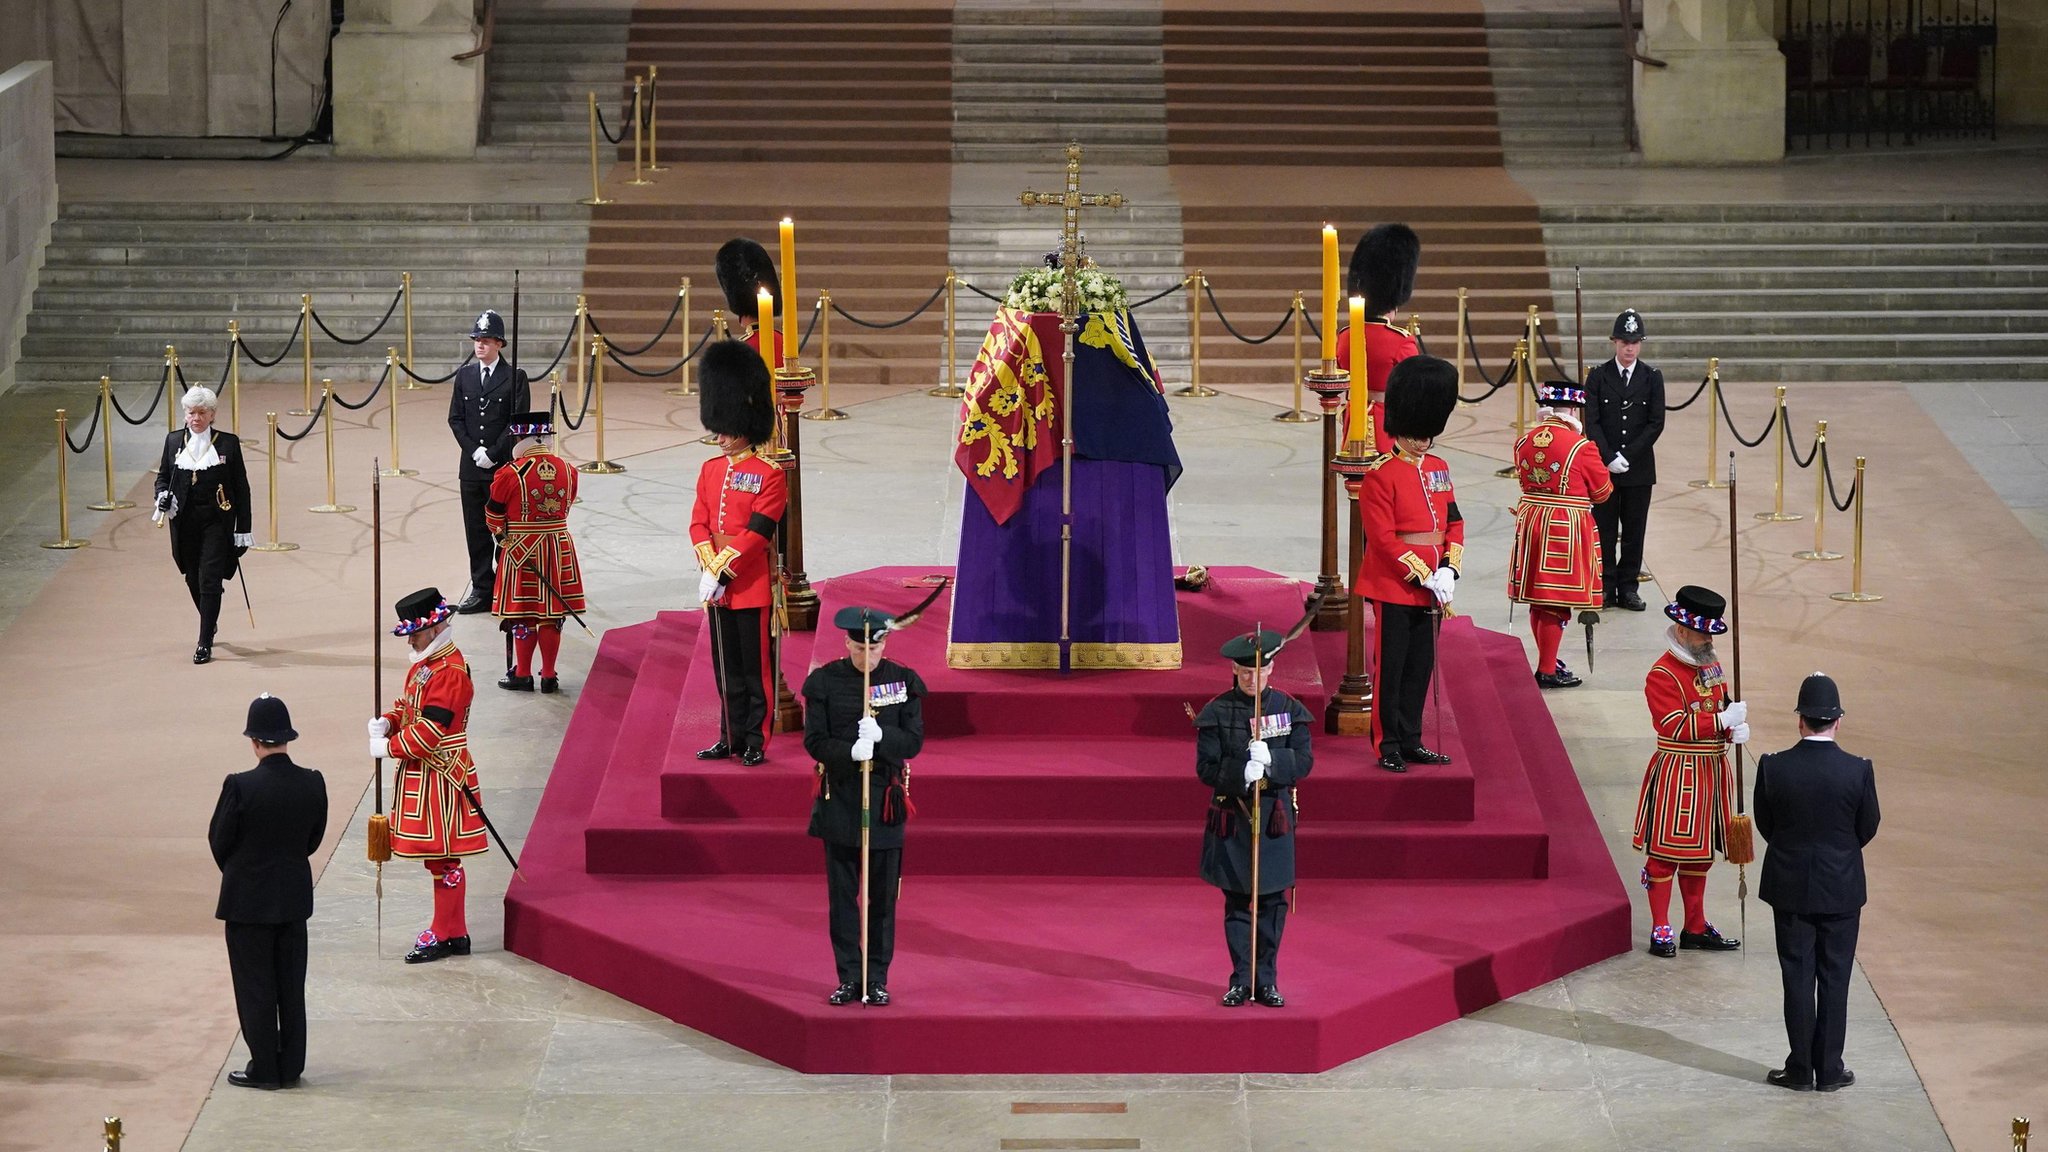 Queen's Funeral: I Feel Privileged, Says Final Lying-in-State Mourner